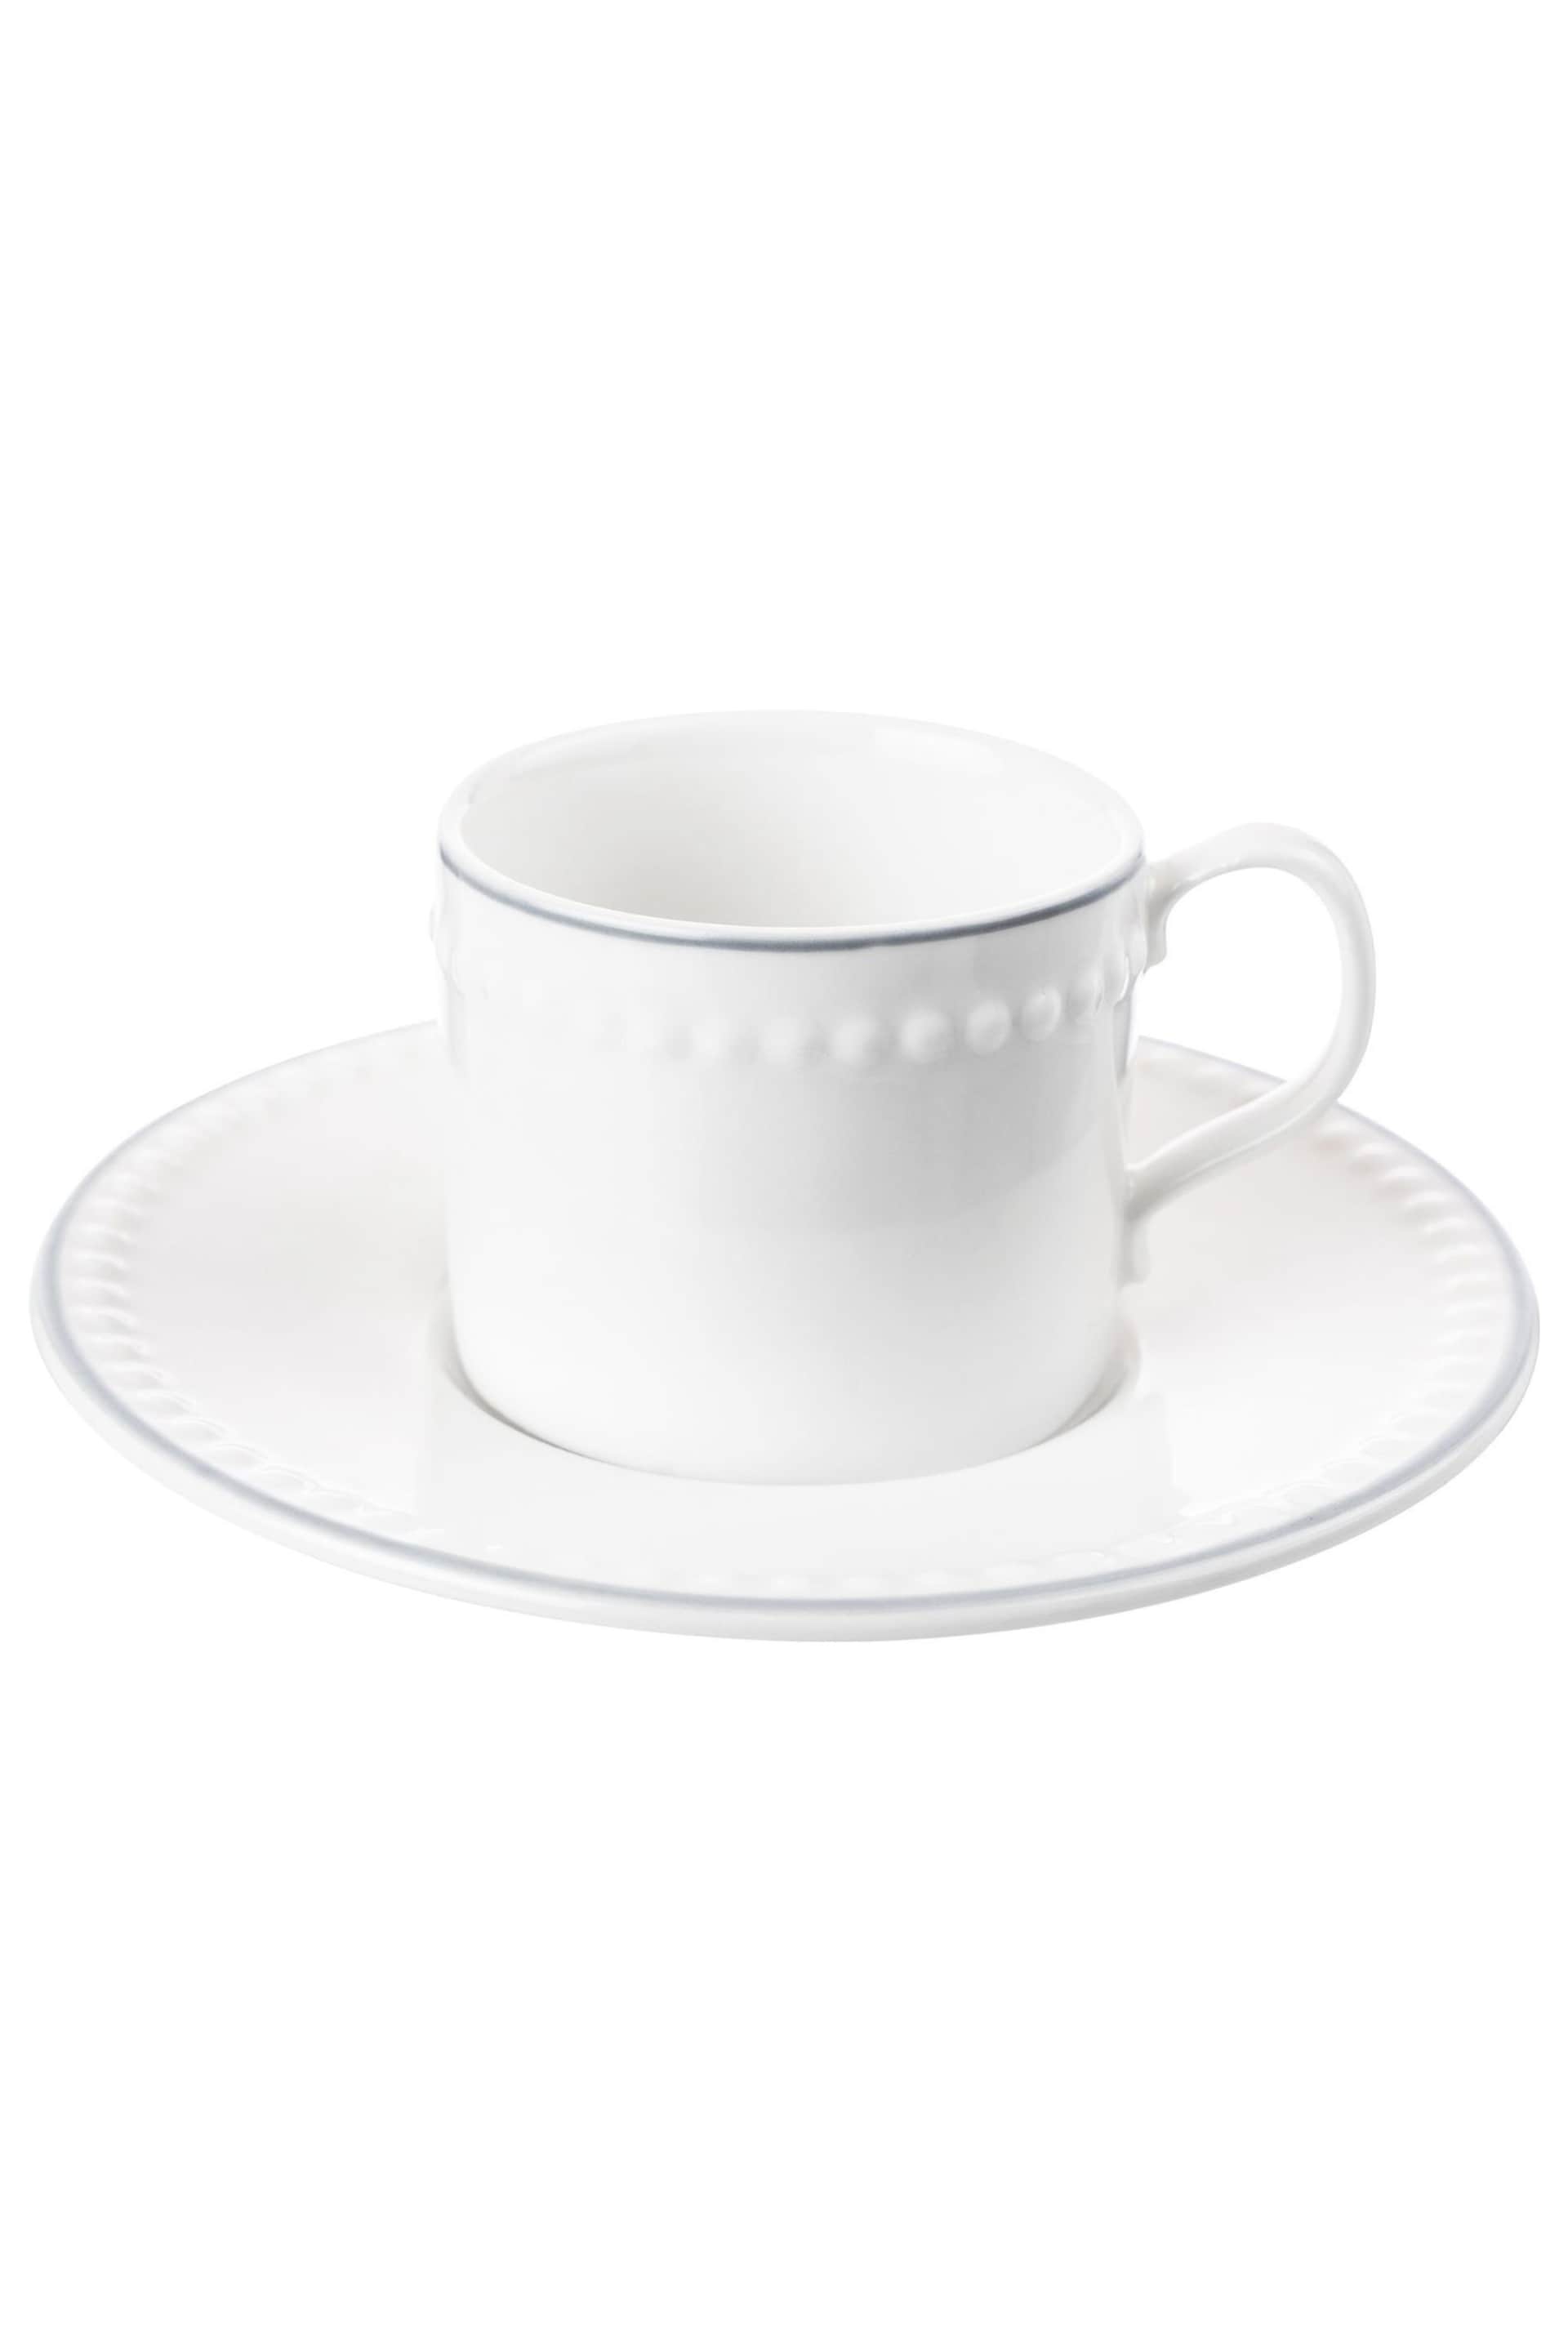 Mary Berry Set of 4 White Signature Espresso Cup & Saucers - Image 3 of 3